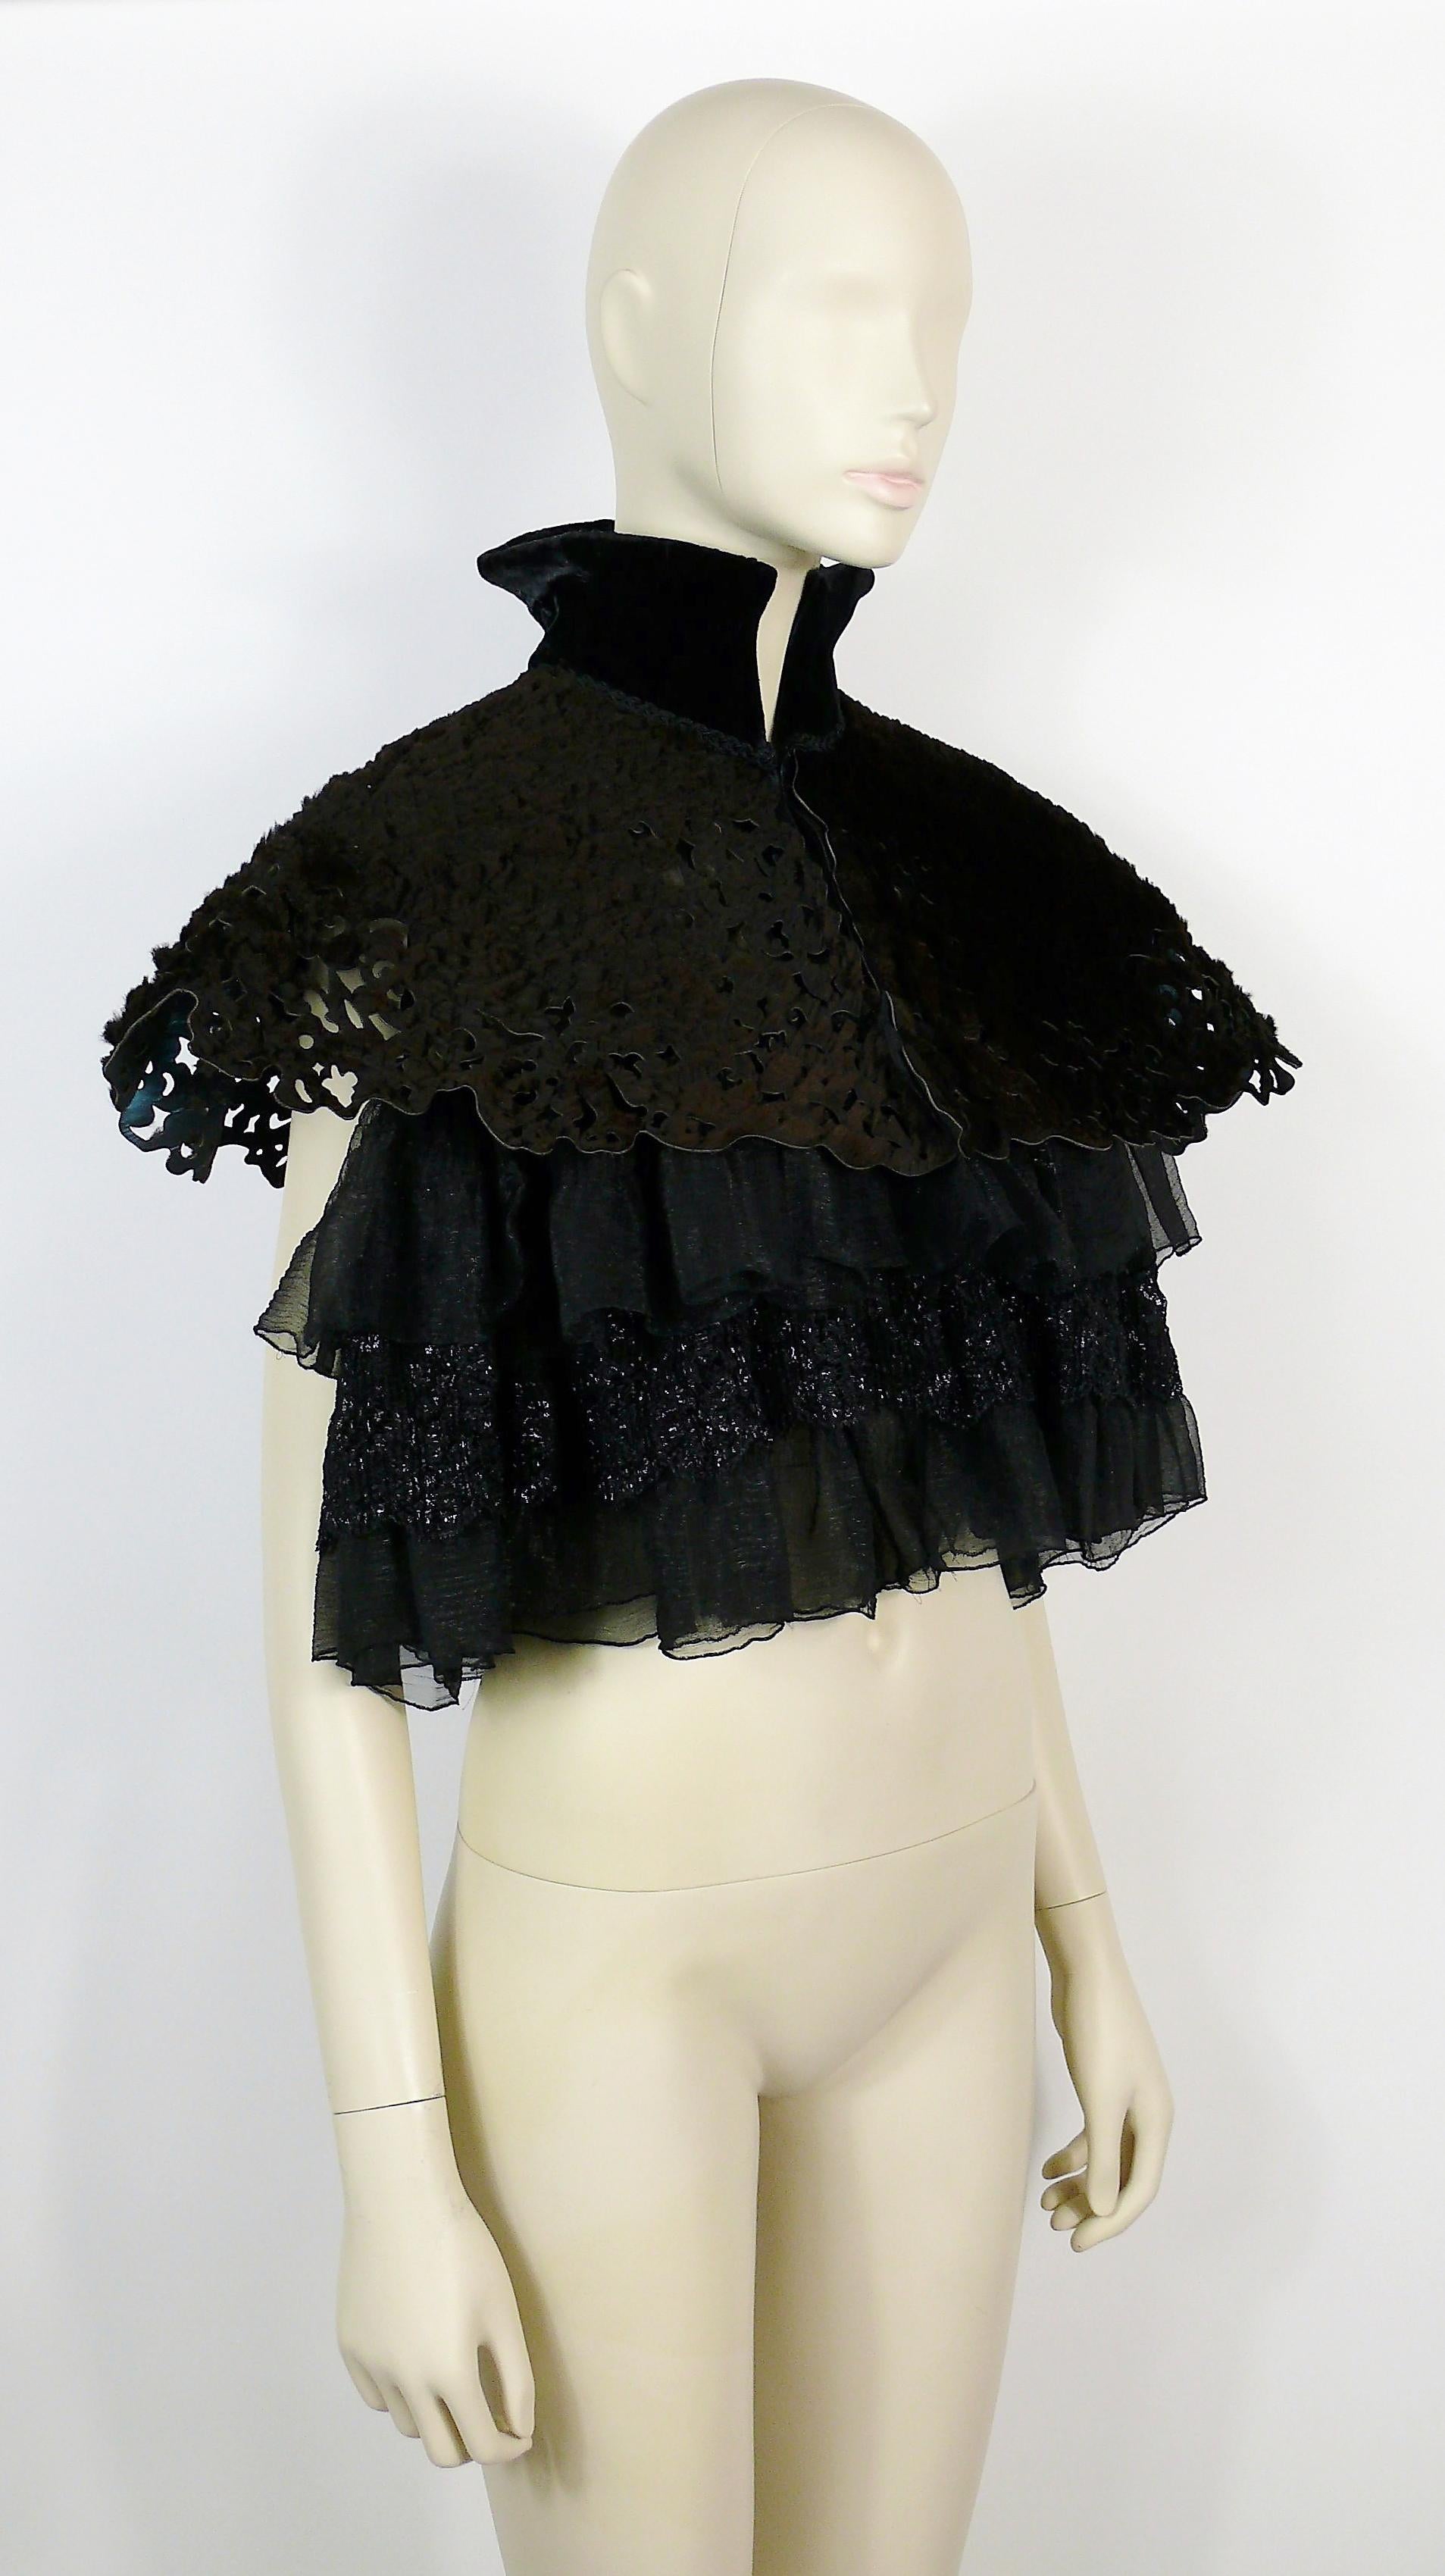 CHRISTIAN LACROIX vintage rare cape short cloack.

This cape features :
- Laser cut farmed kangaroo brown fur.
- Structured black velvet collar.
- Lace and organza ruffles.
- Front hook closure.

Label reads CHRISTIAN LACROIX Paris.

Size tag reads